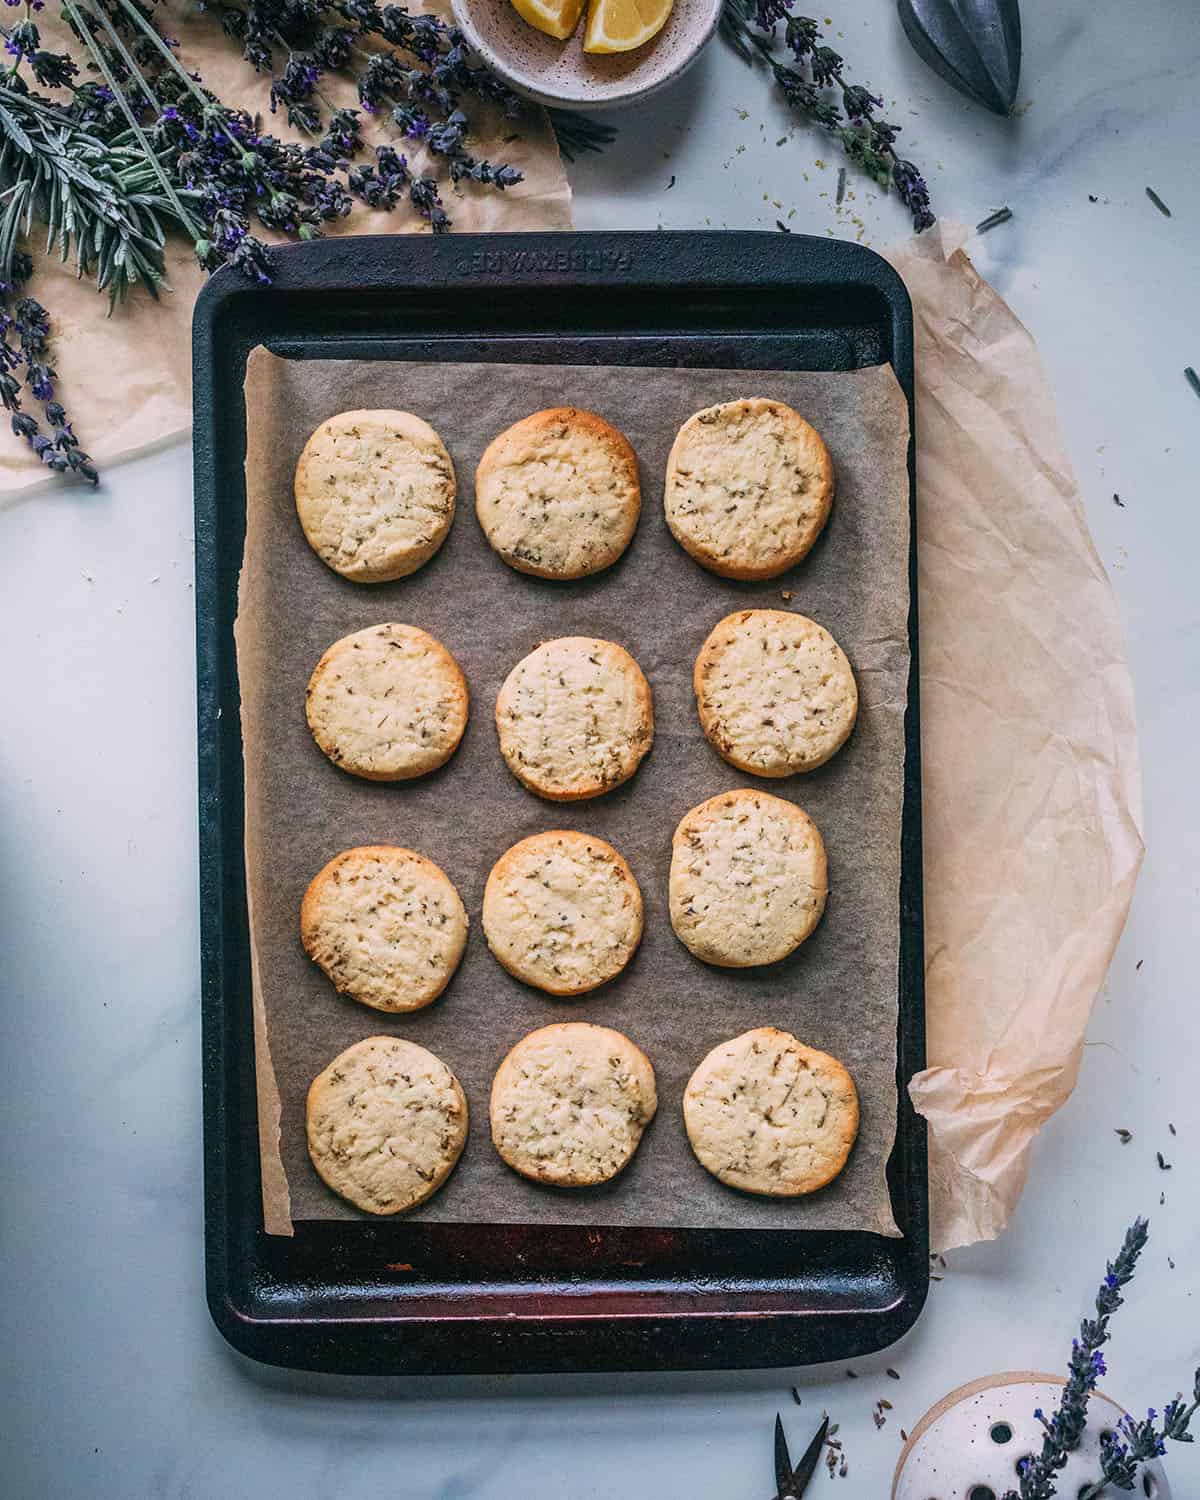 Baked lavender shortbread cookies still on the baking sheet, the cookies are golden at the edges, on a white countertop surrounded by fresh lavender.